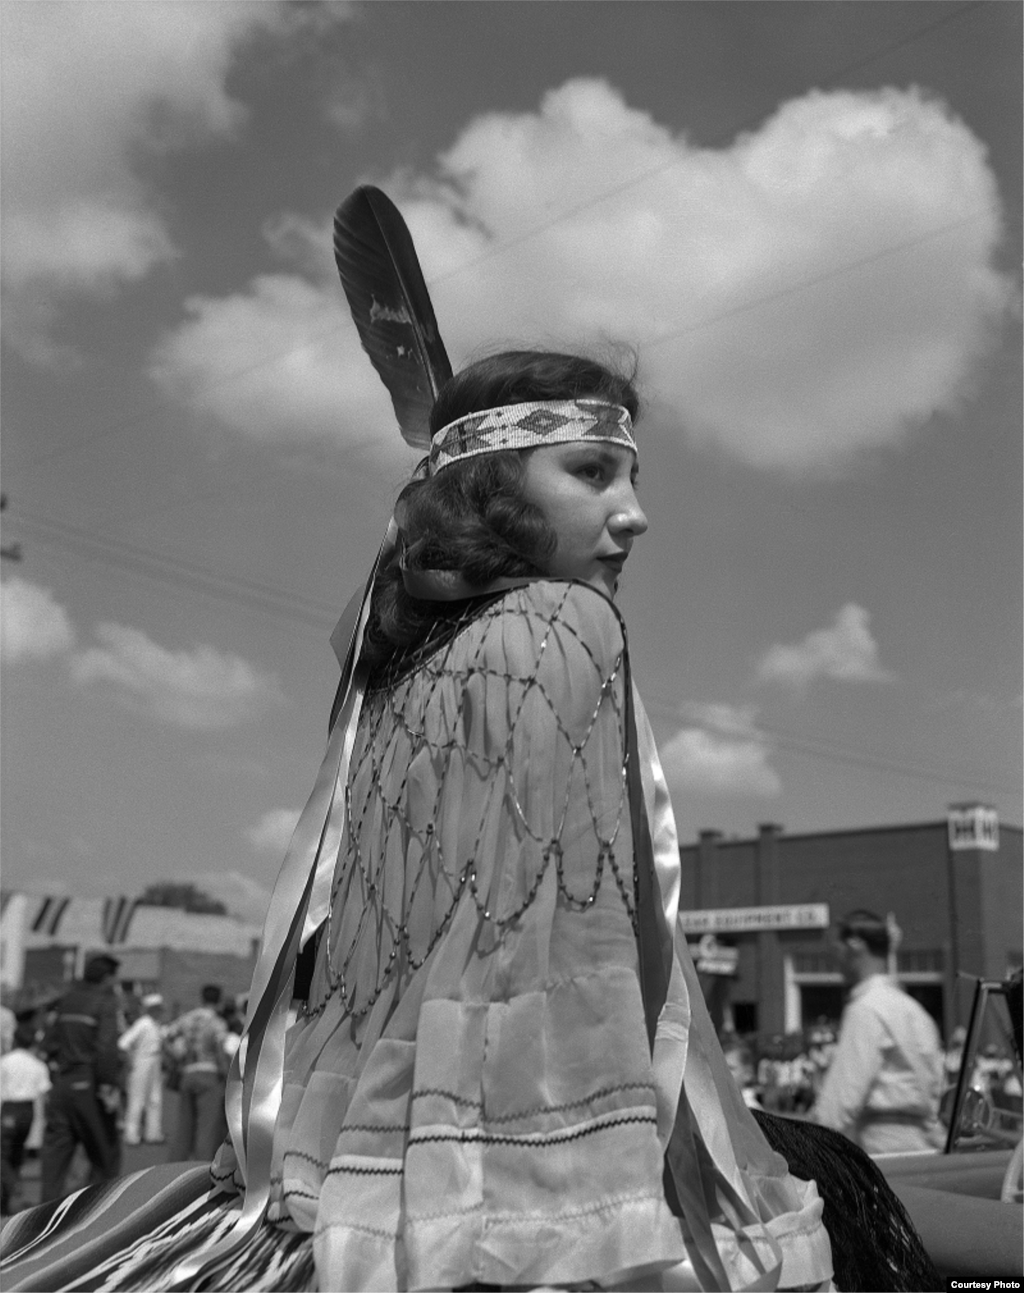 Eula Mae Narcomey Doonkeen (Seminole) in the American Indian Exposition Parade. Andarko, Oklahoma, ca. 1952. 45EXCW6. © 2014 Estate of Horace Poolaw. Reprinted with permission.